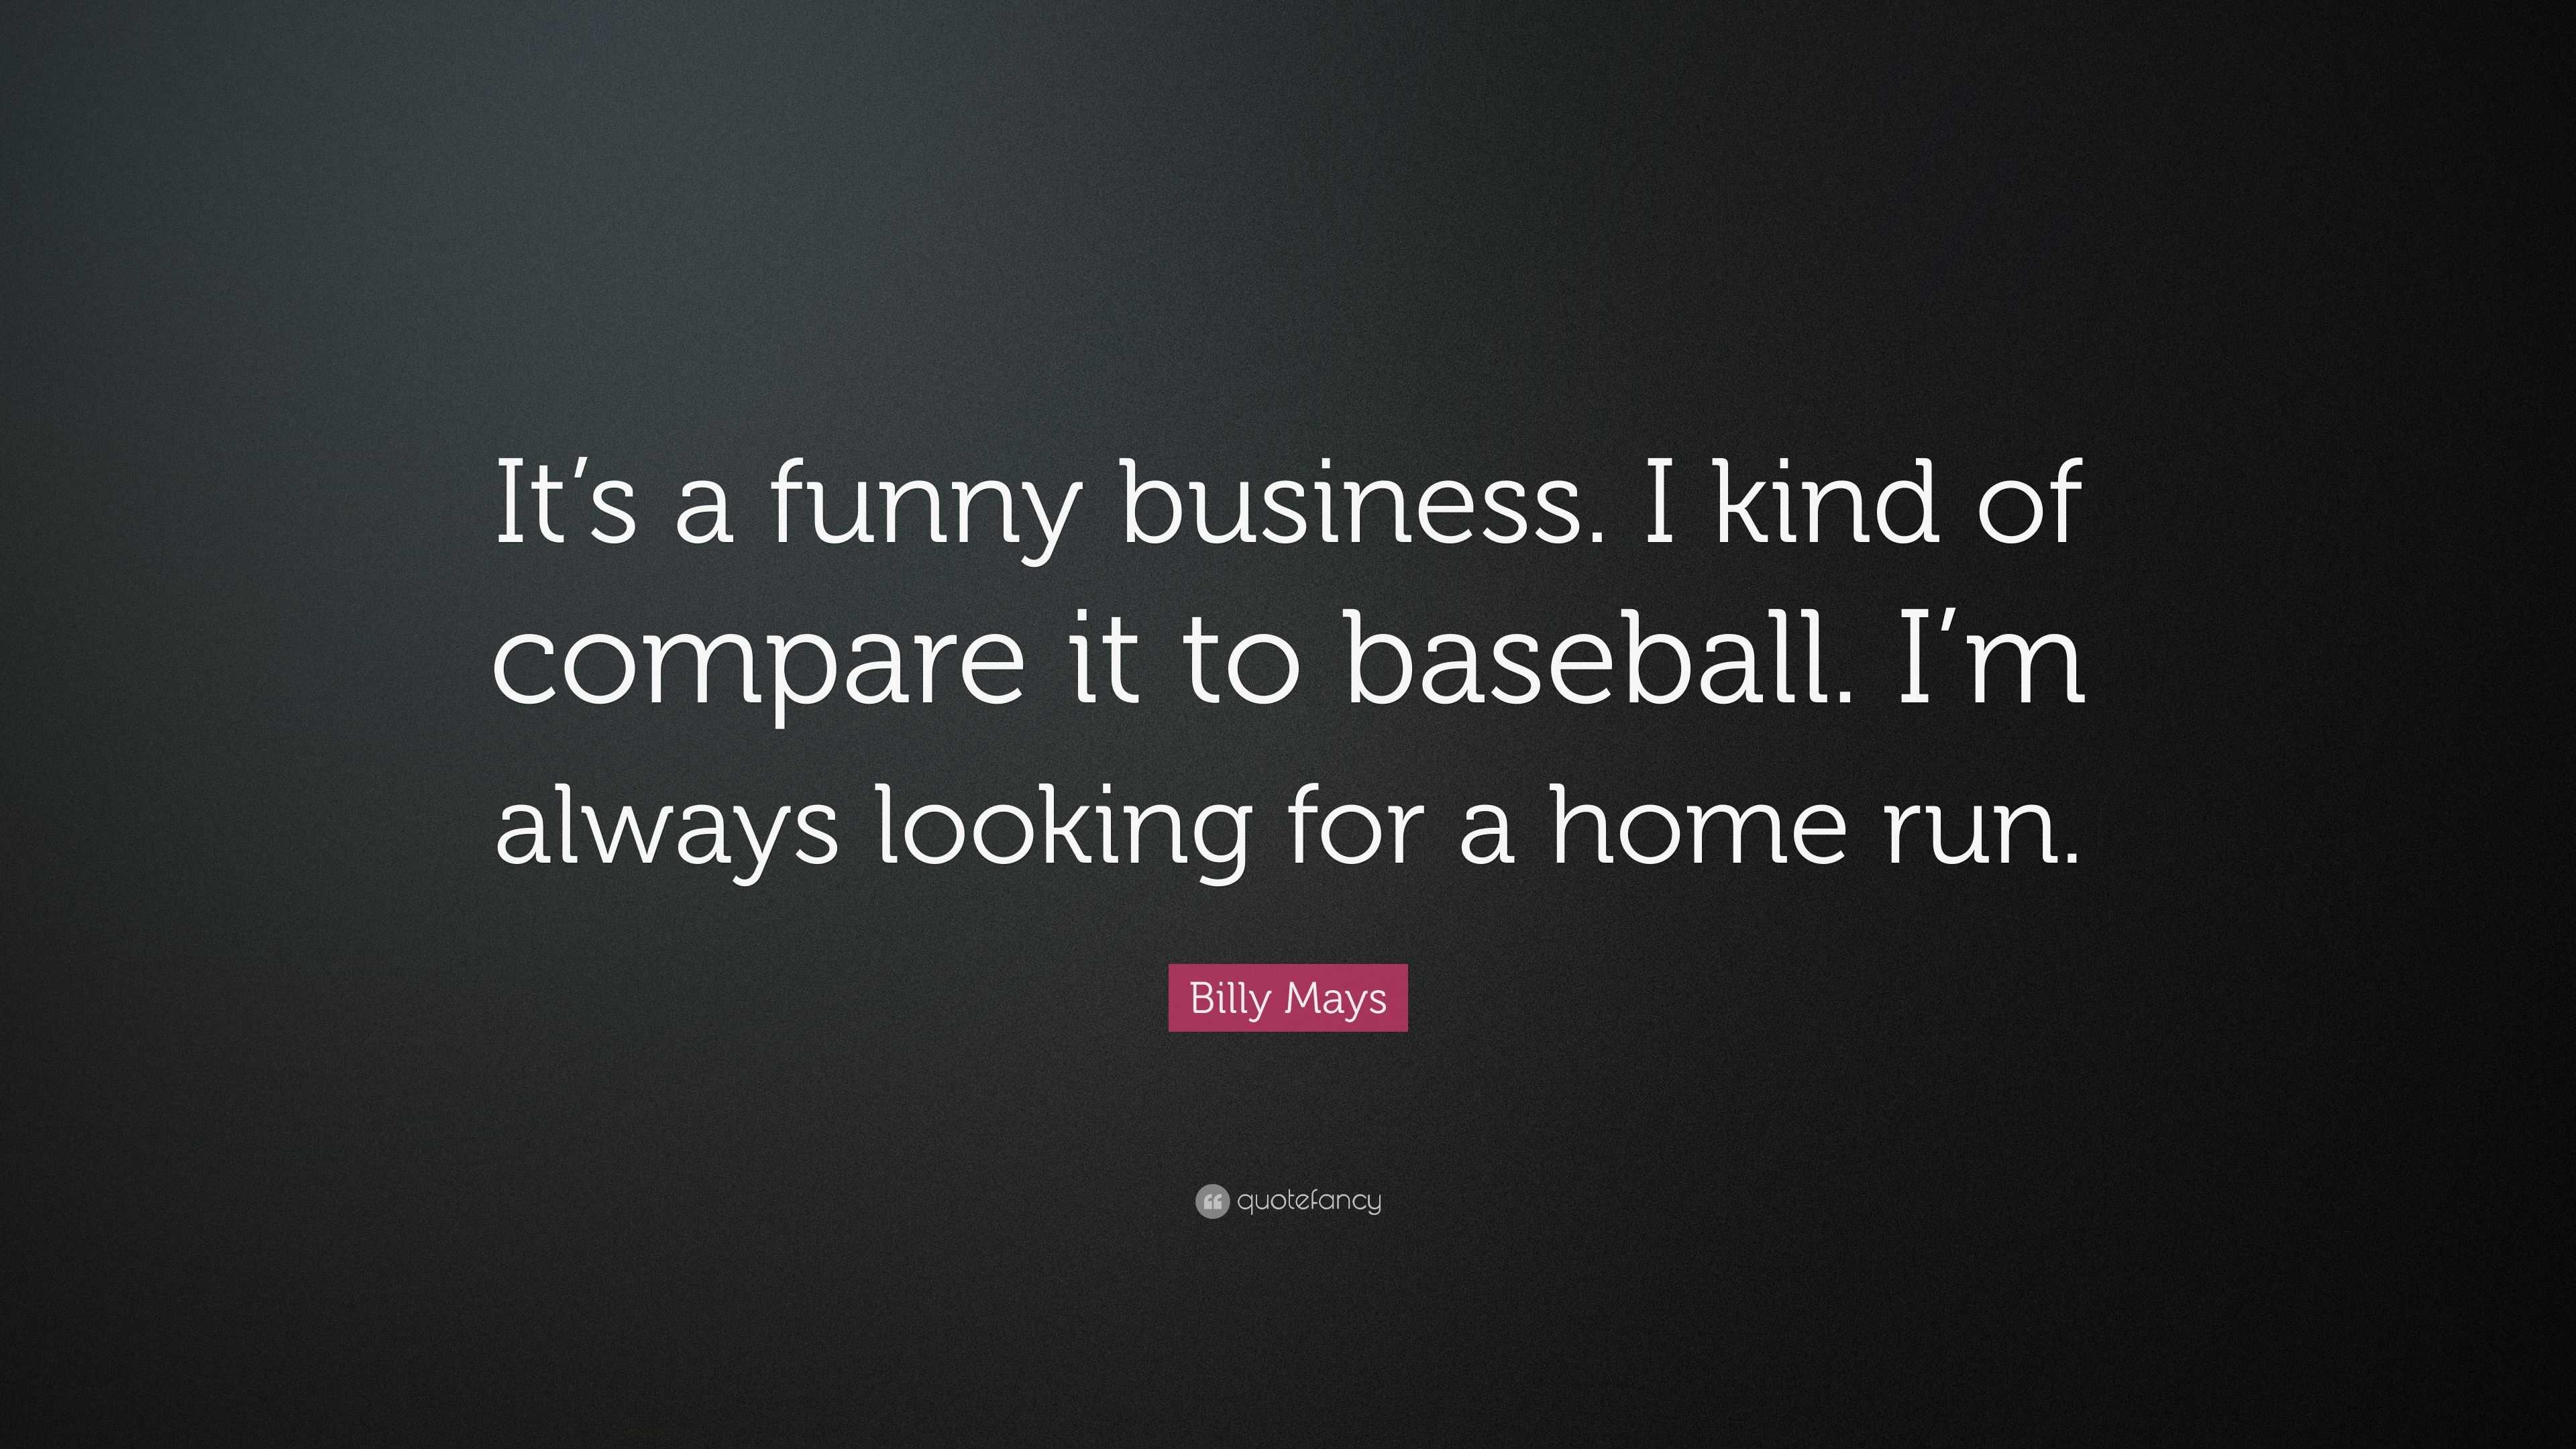 Billy Mays Quote: “It’s a funny business. I kind of compare it to ...